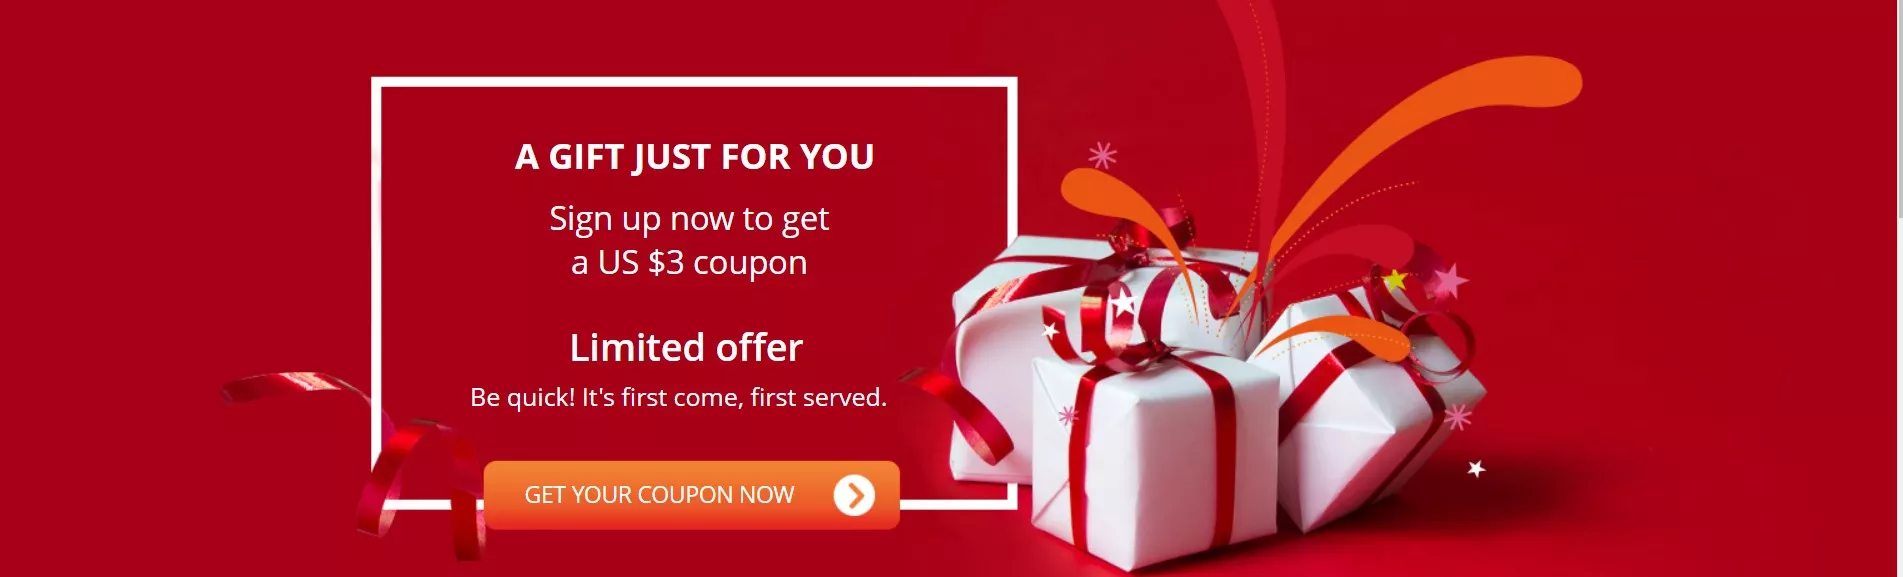 Top 10 AliExpress coupon codes you need to know